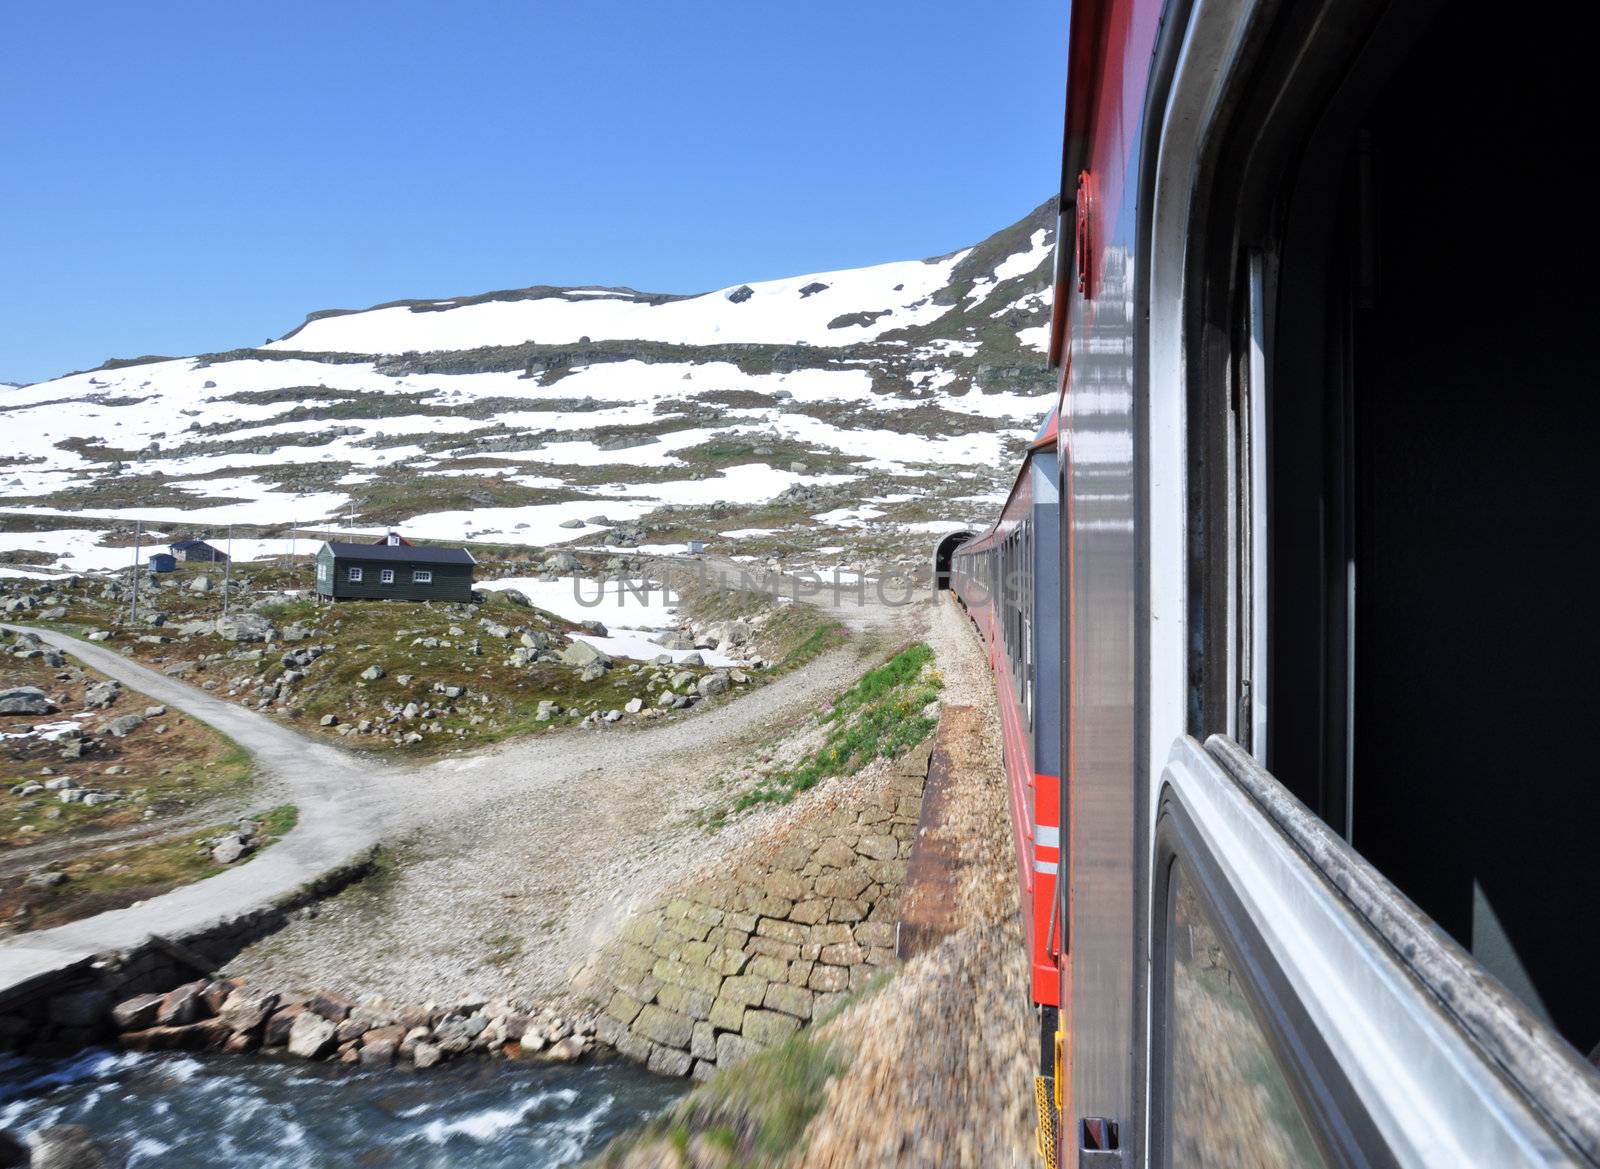 Travel by train across Norway in summer